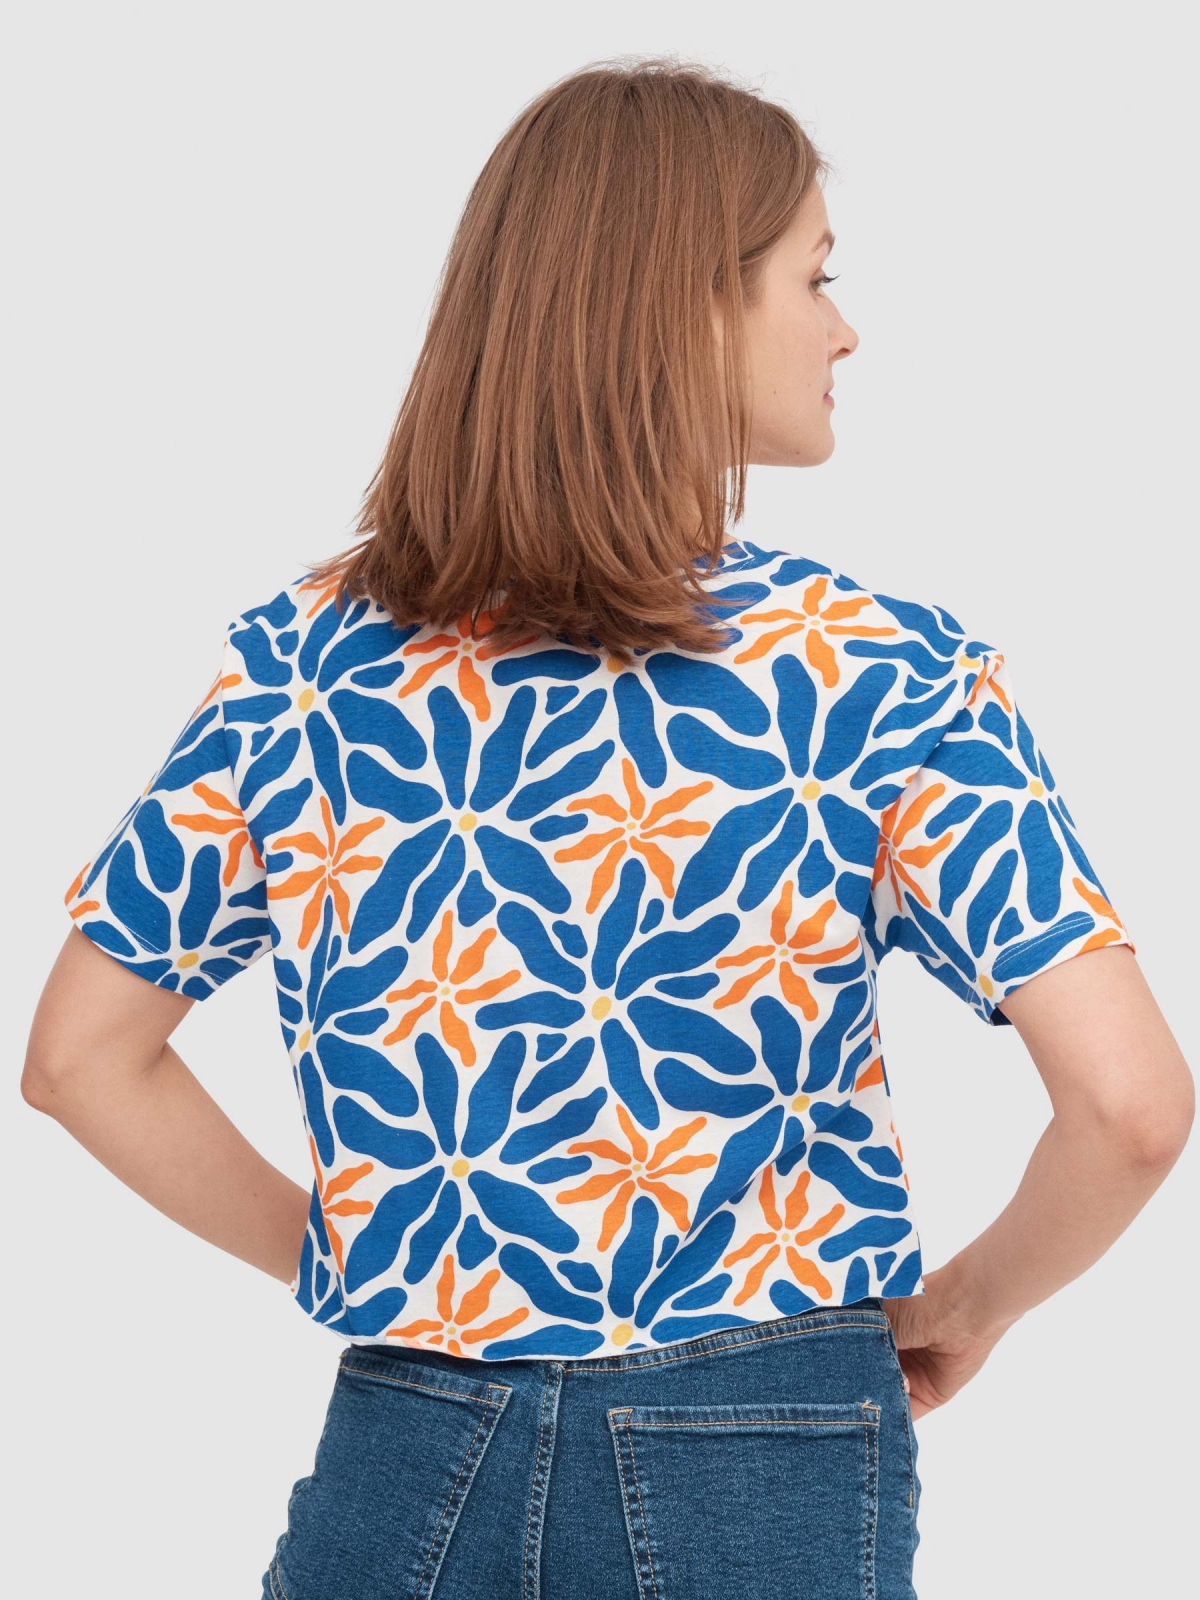 Flower print t-shirt with knot off white middle back view